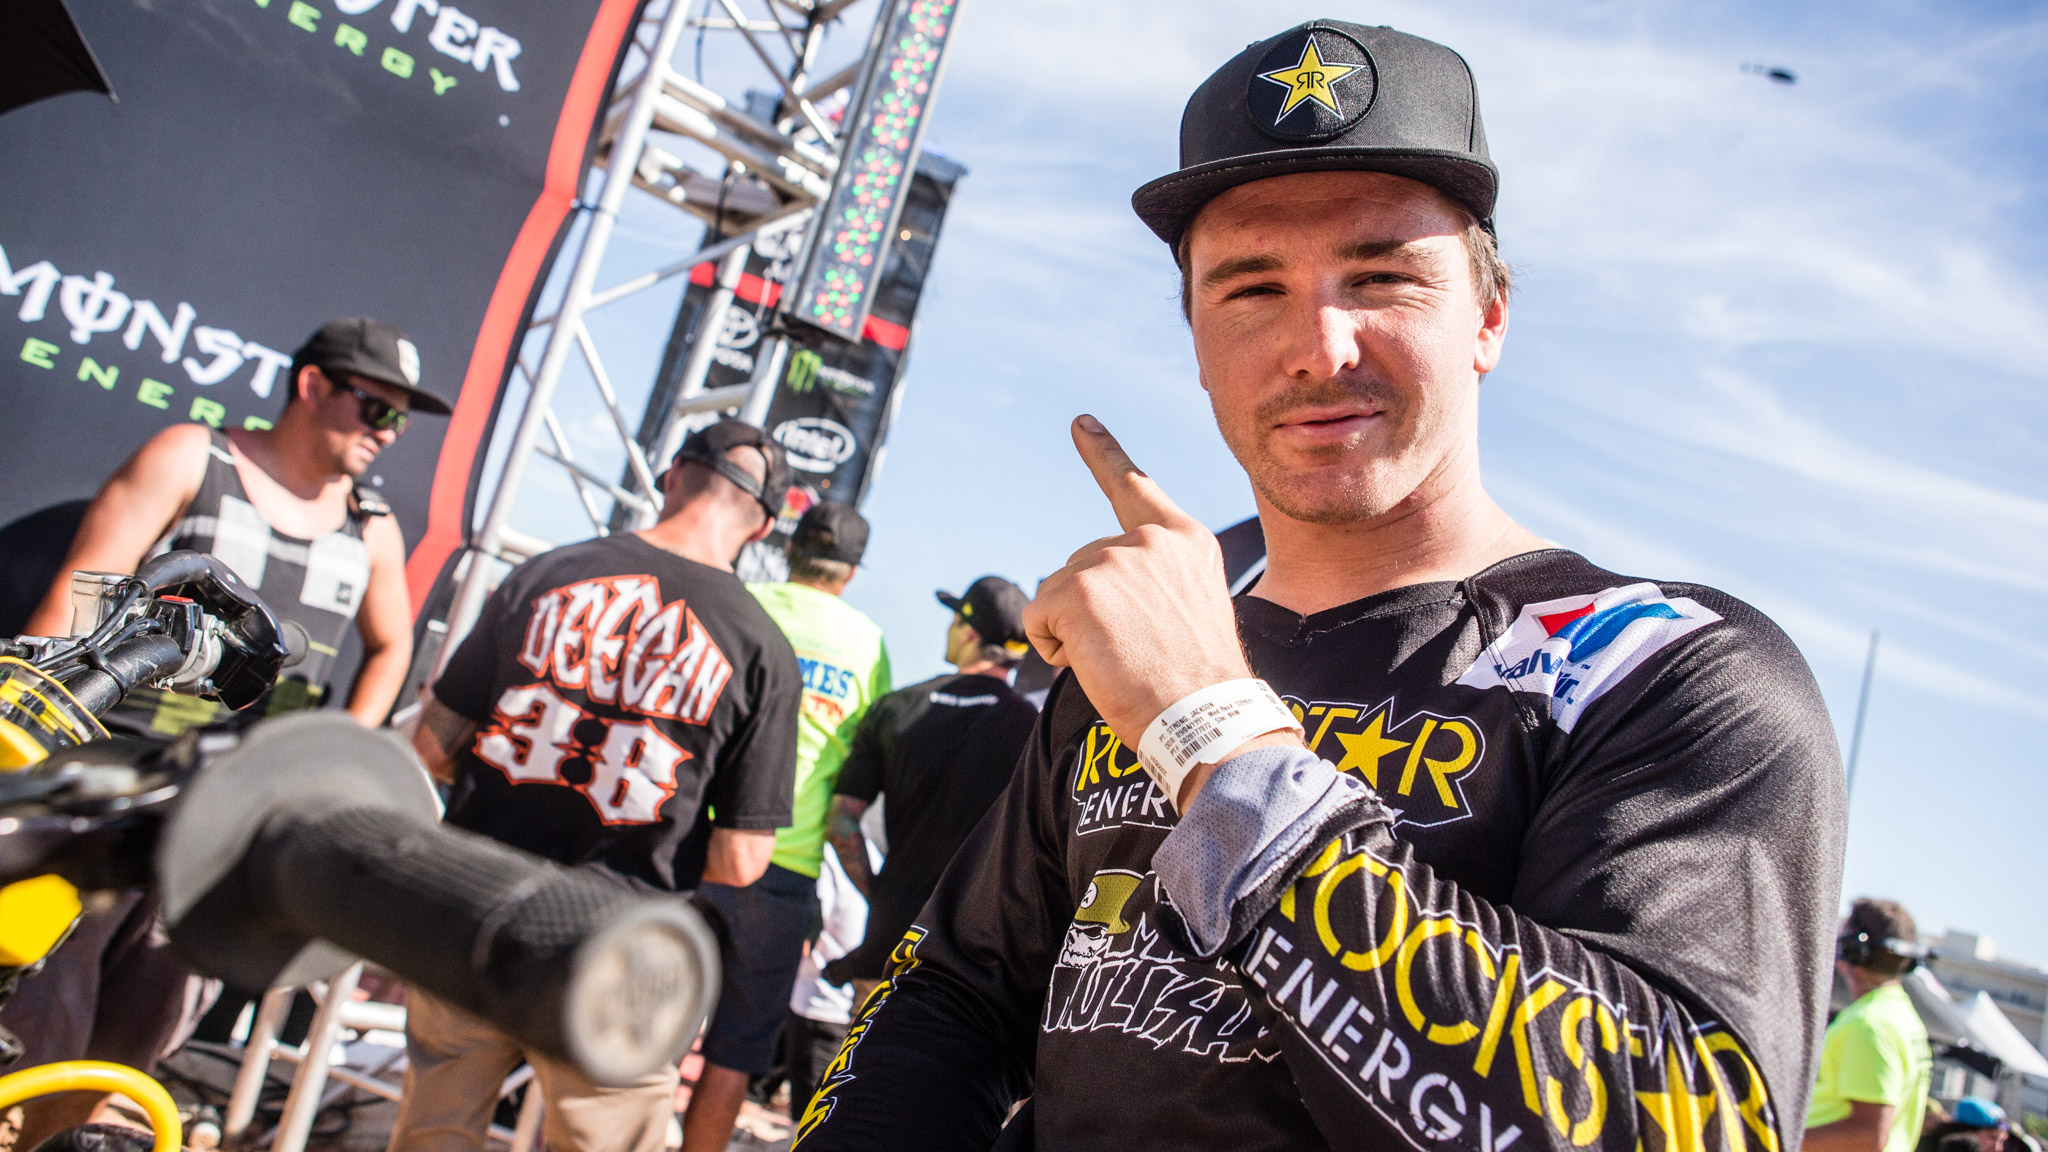 Jackson Strong: Moto X Best Trick/Freestyle